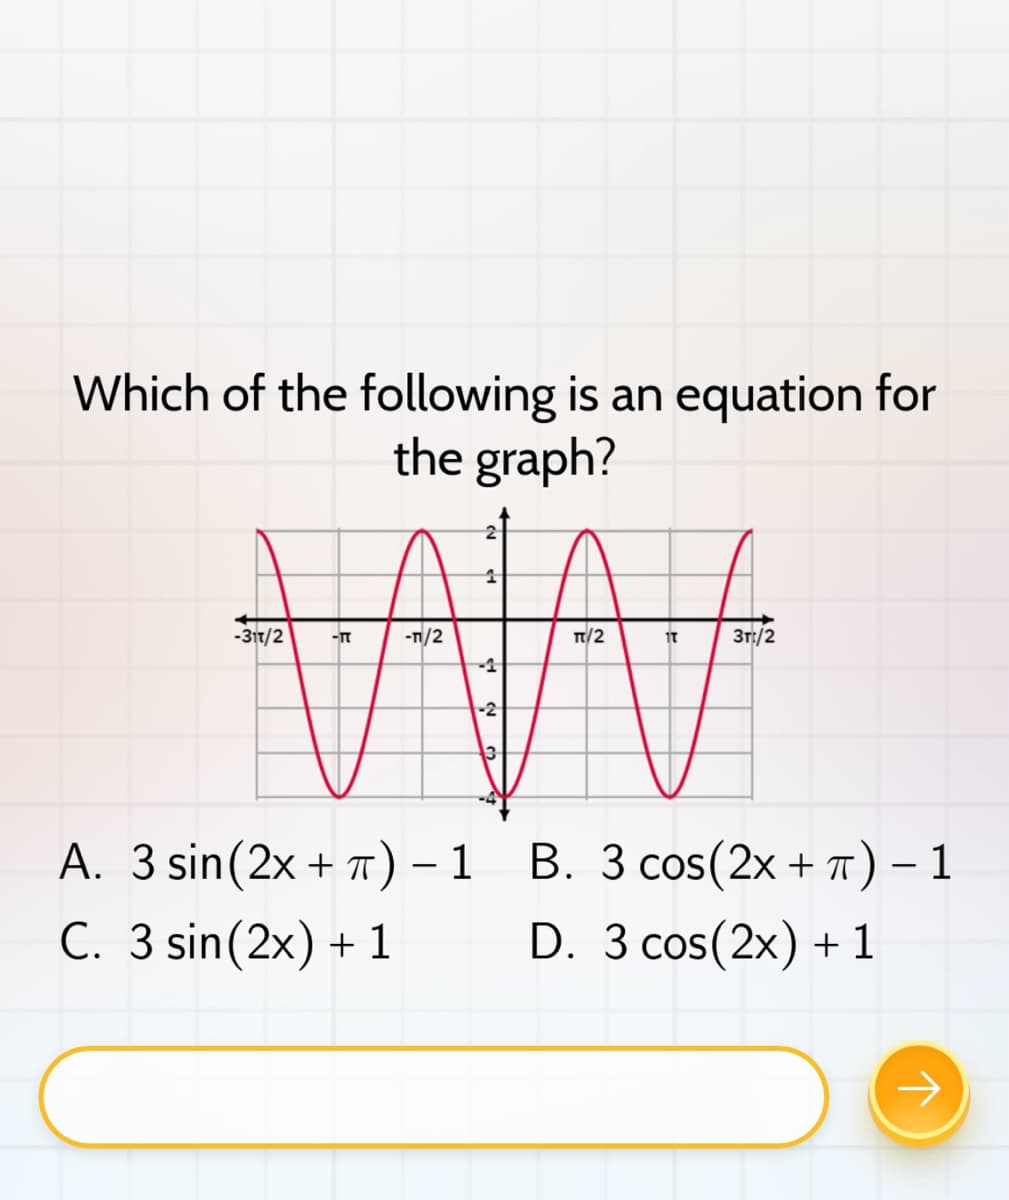 Which of the following is an equation for
the graph?
-31T/2
-TT
-1/2
1
-2
13
TT/2
IT
Зг:/2
A. 3 sin (2x + π) - 1 B. 3 cos(2x + π) − 1
-
C. 3 sin (2x) + 1
D. 3 cos (2x) + 1
→